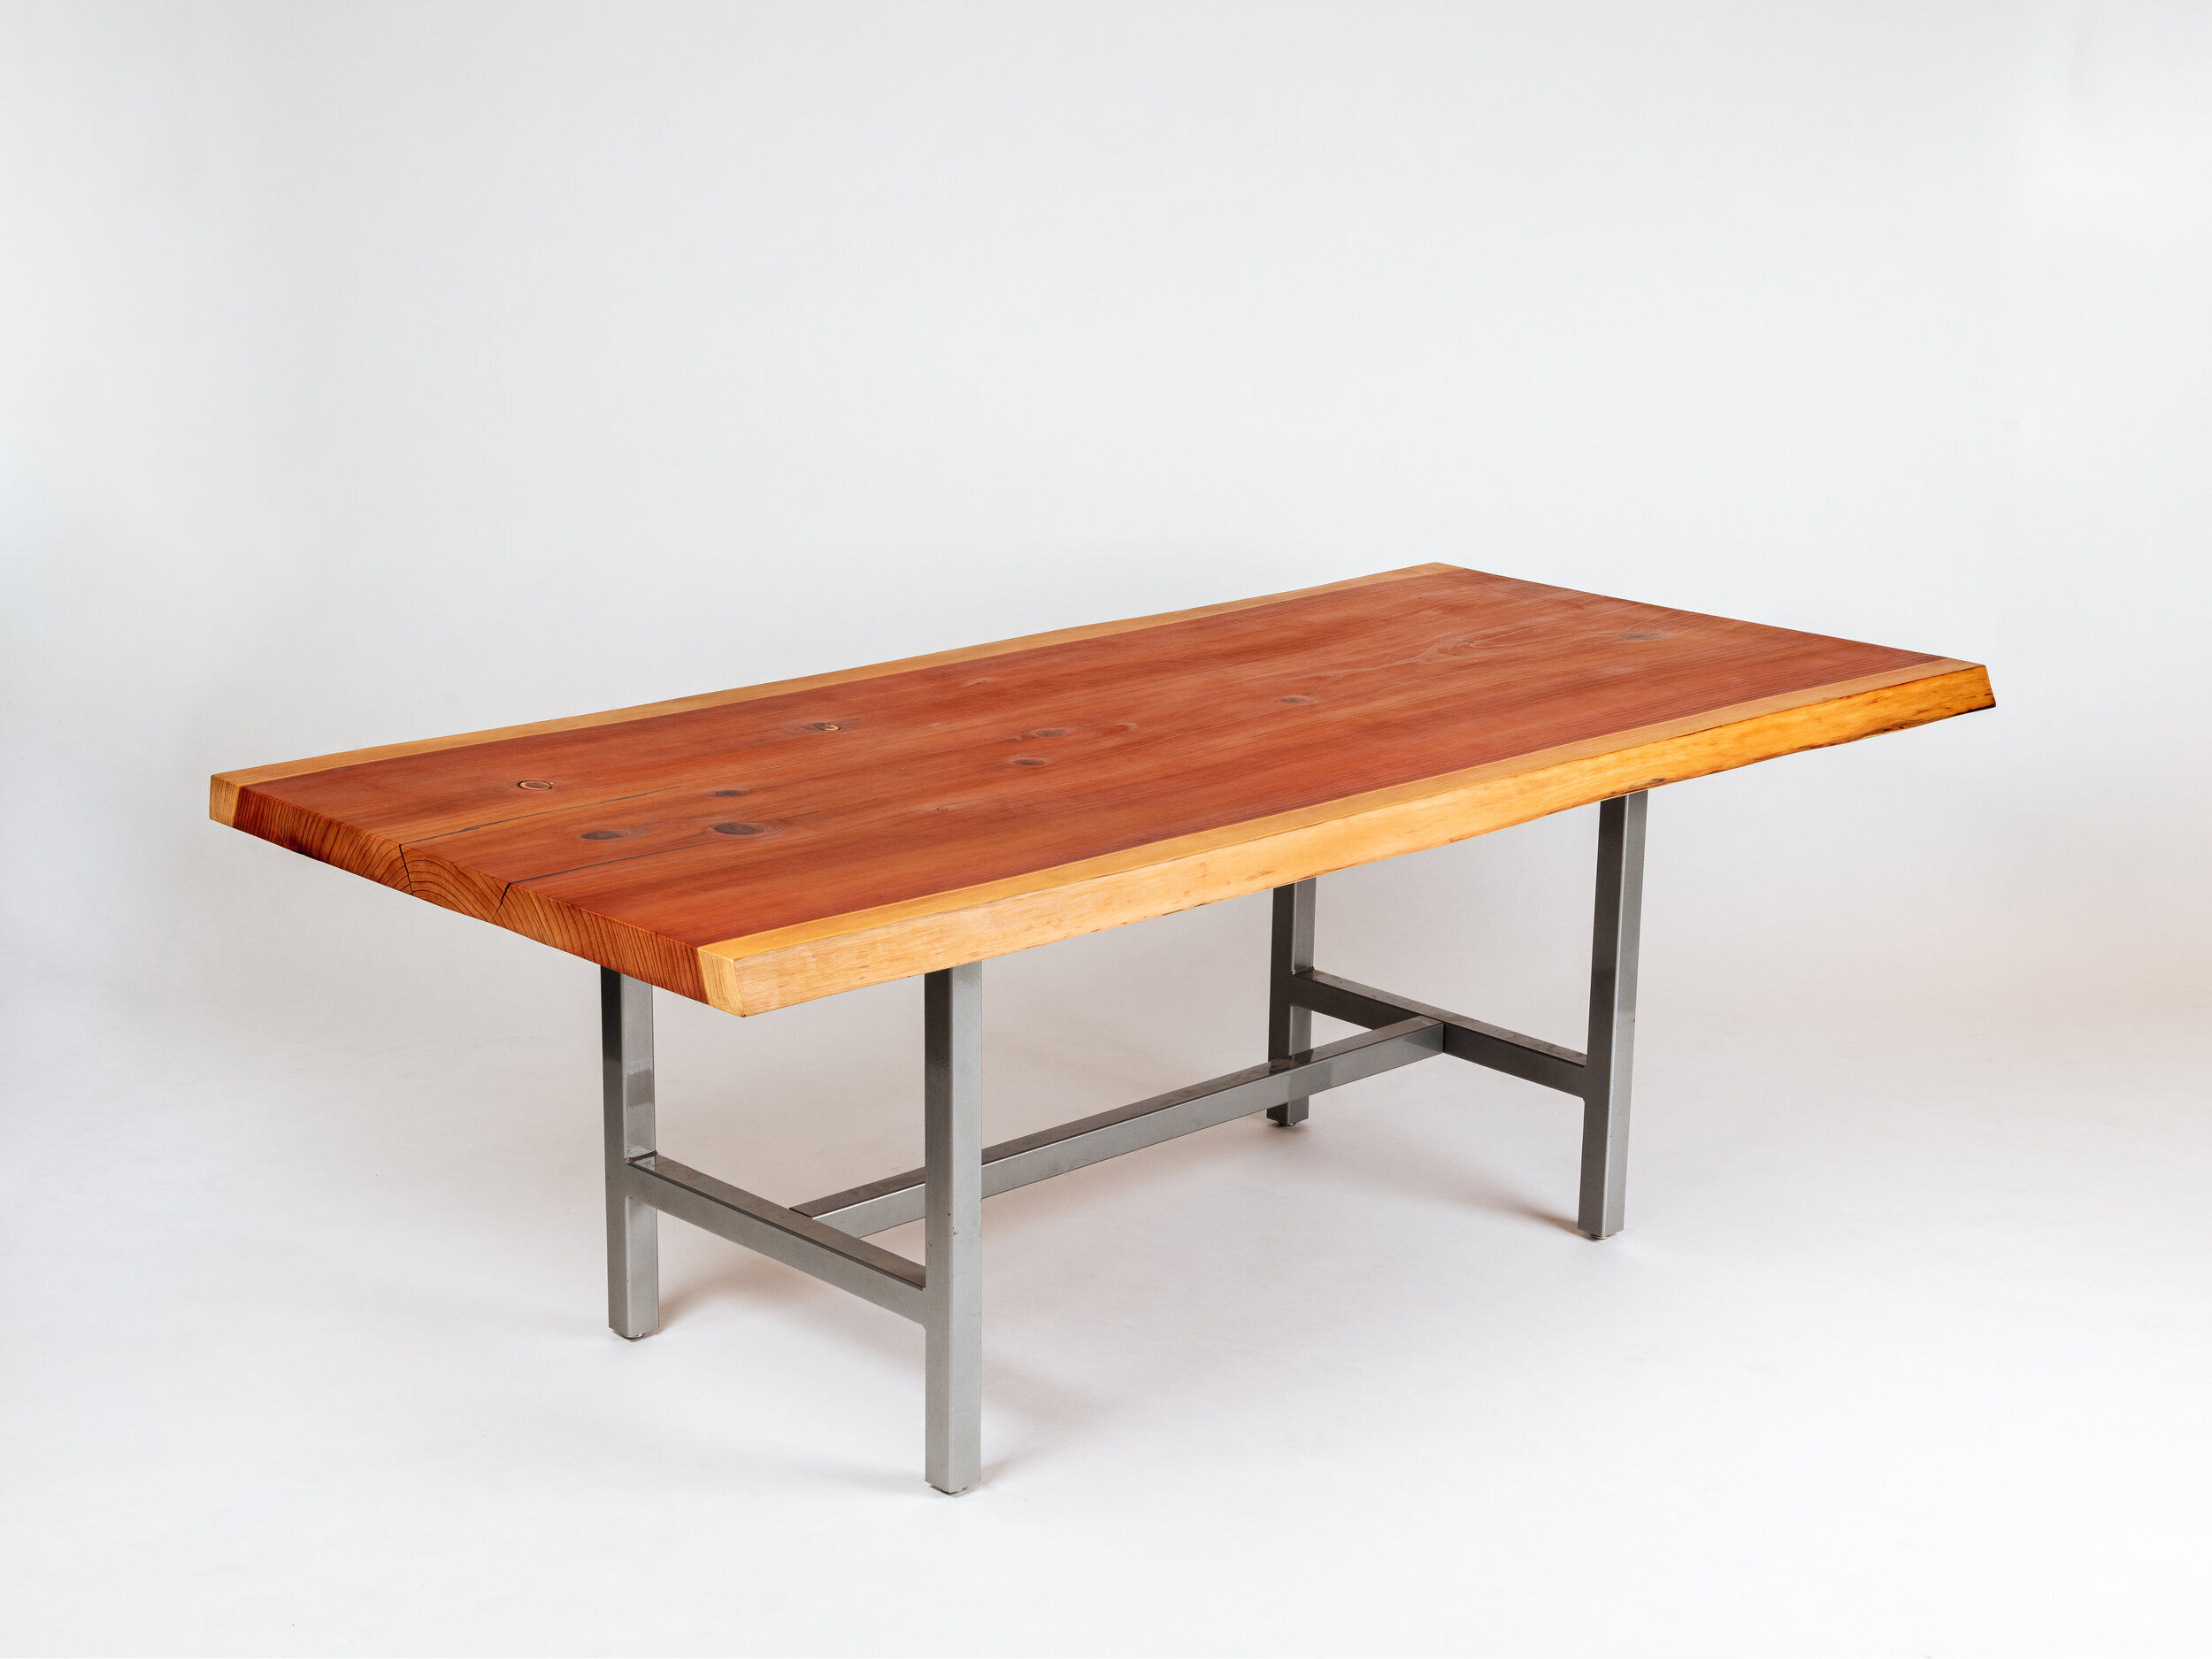 Live-Edge Redwood Dining Table